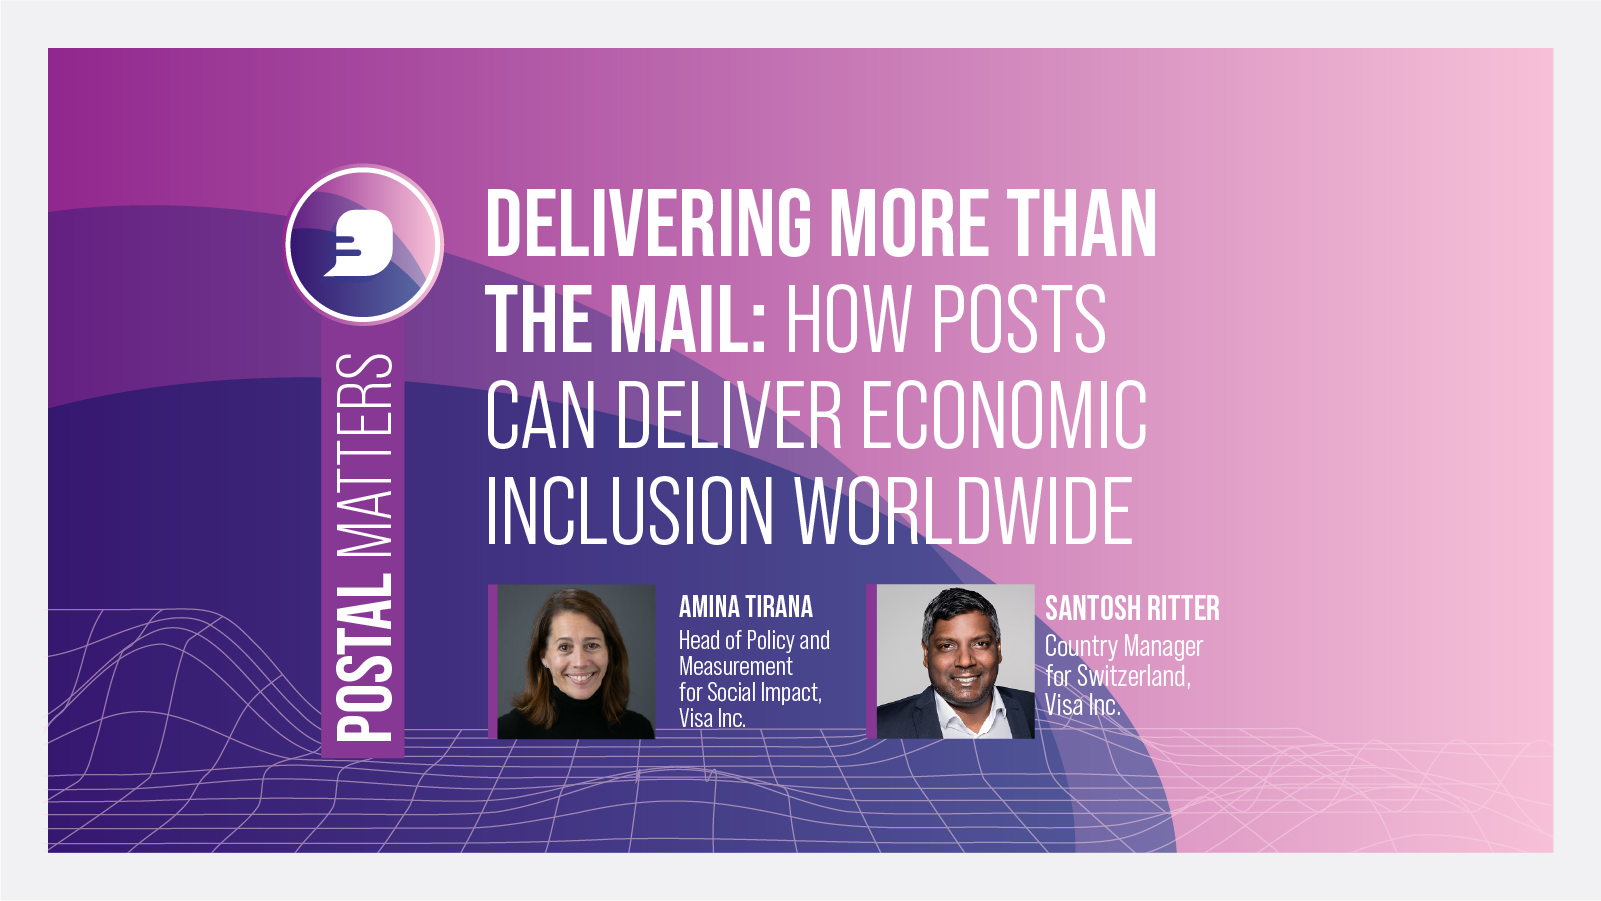 Delivering more than the mail: How Posts can deliver economic inclusion worldwide